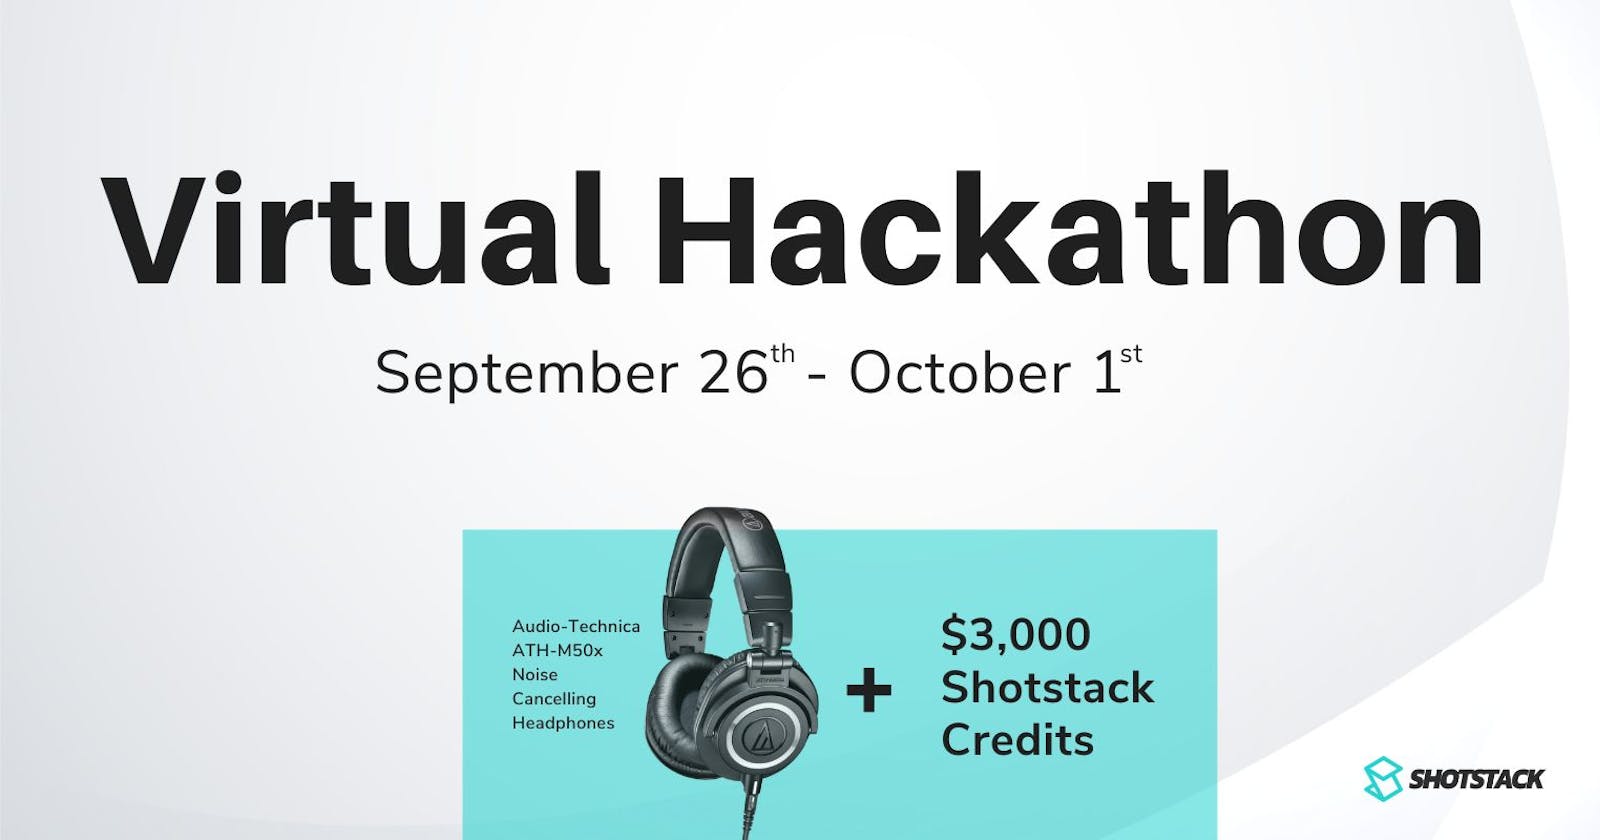 Shotstack's Virtual Hackathon: Join us to Build awesome media apps